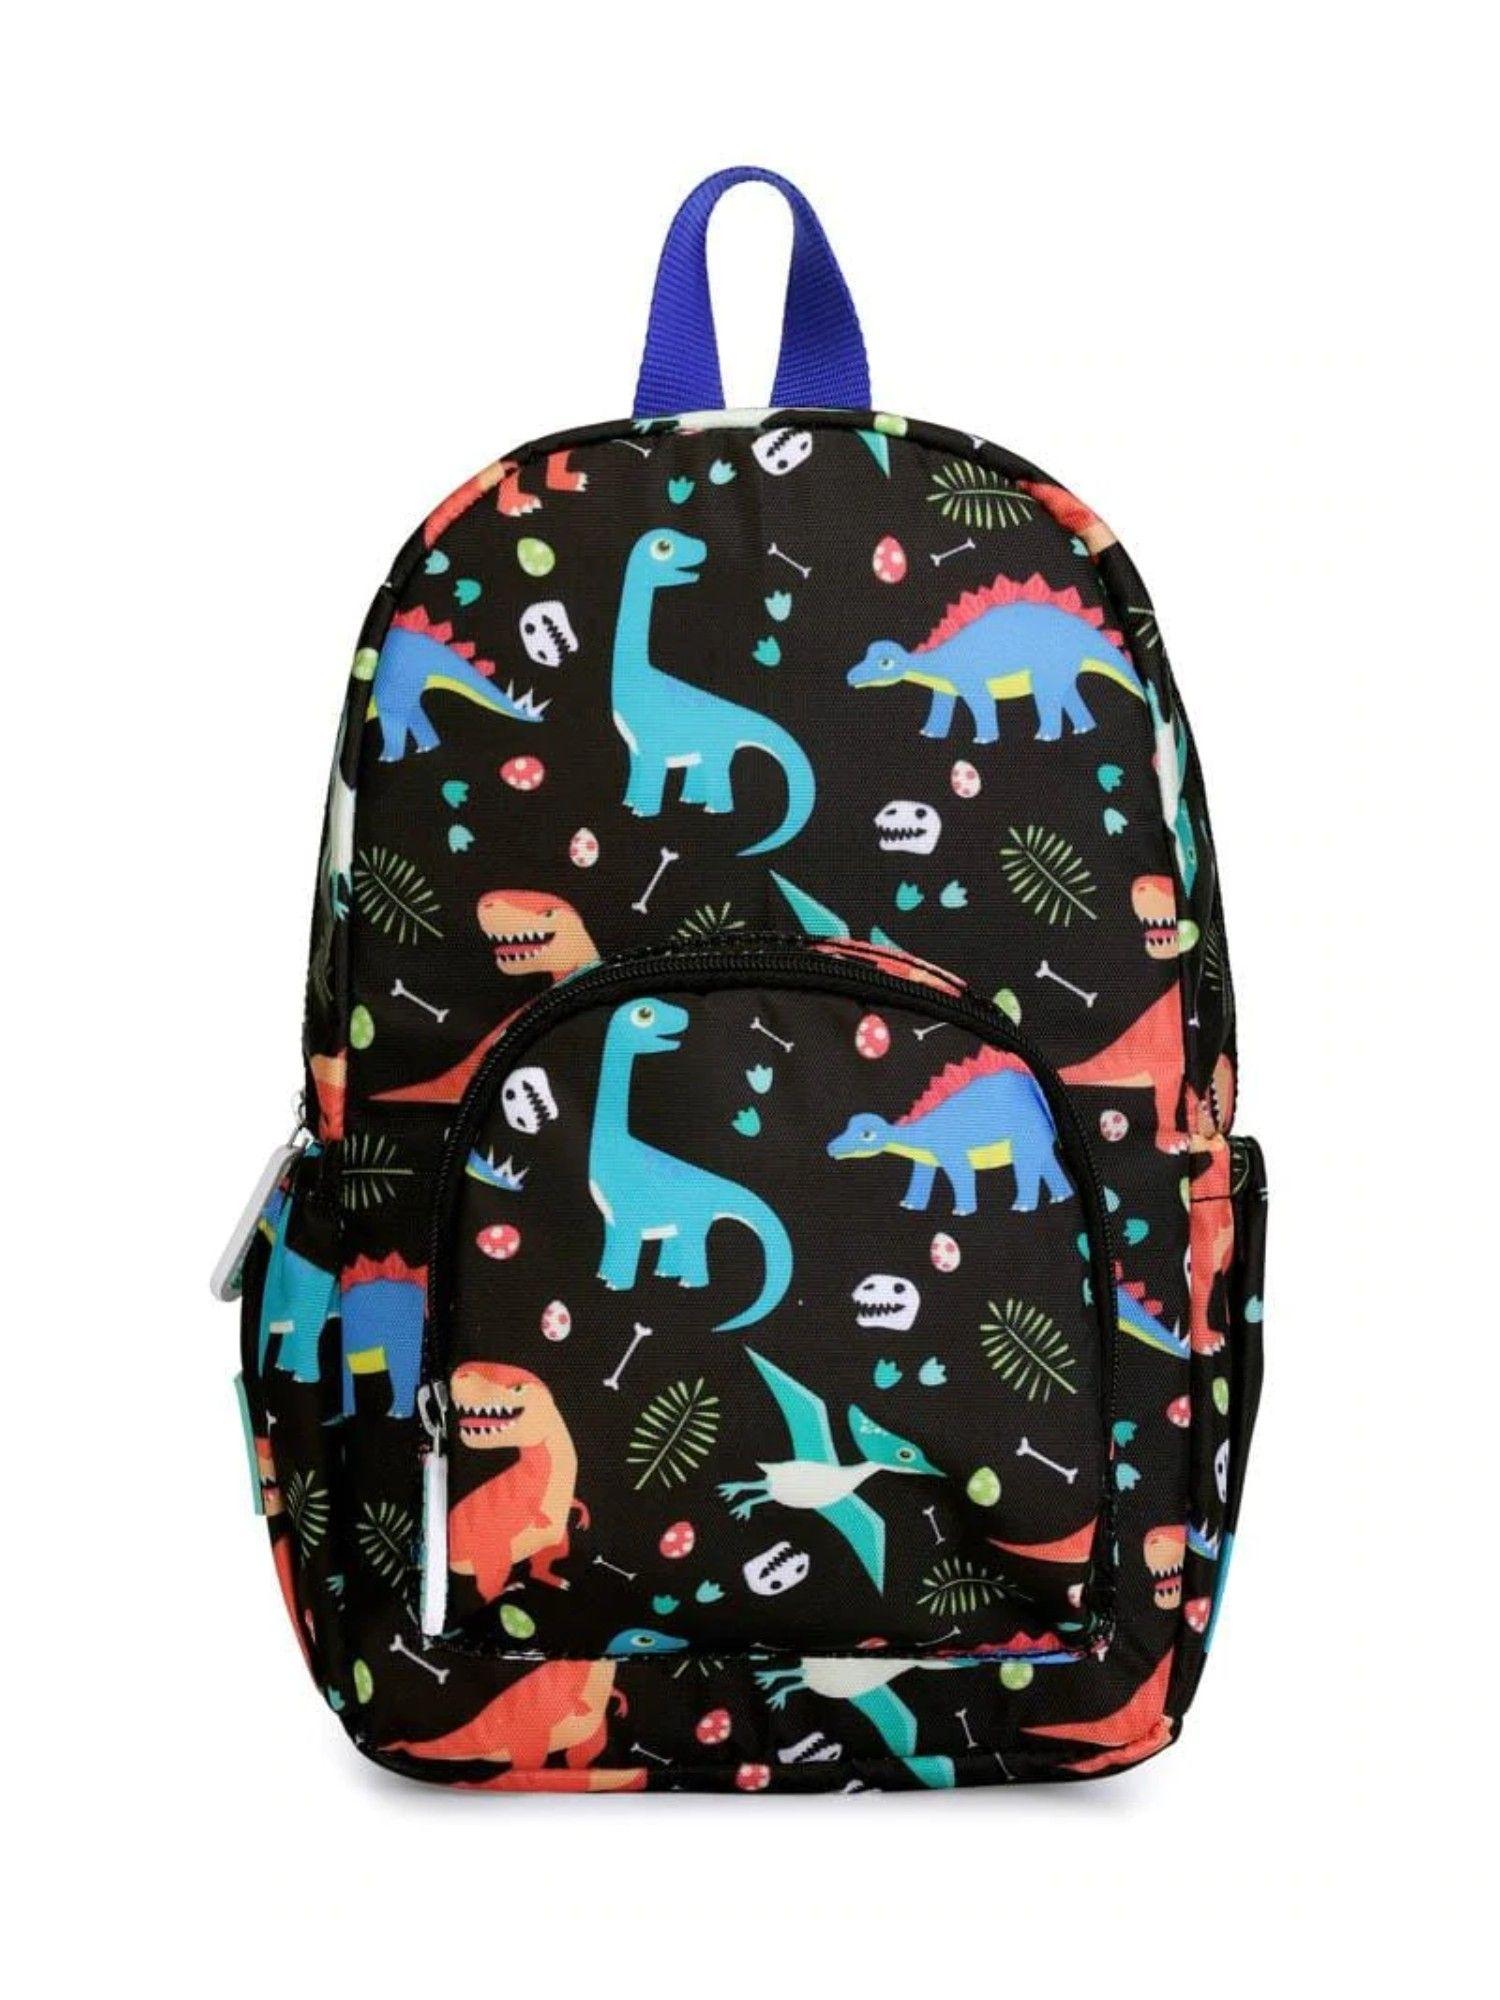 mighty dino mini backpack 18 months 3 years personalize your bag